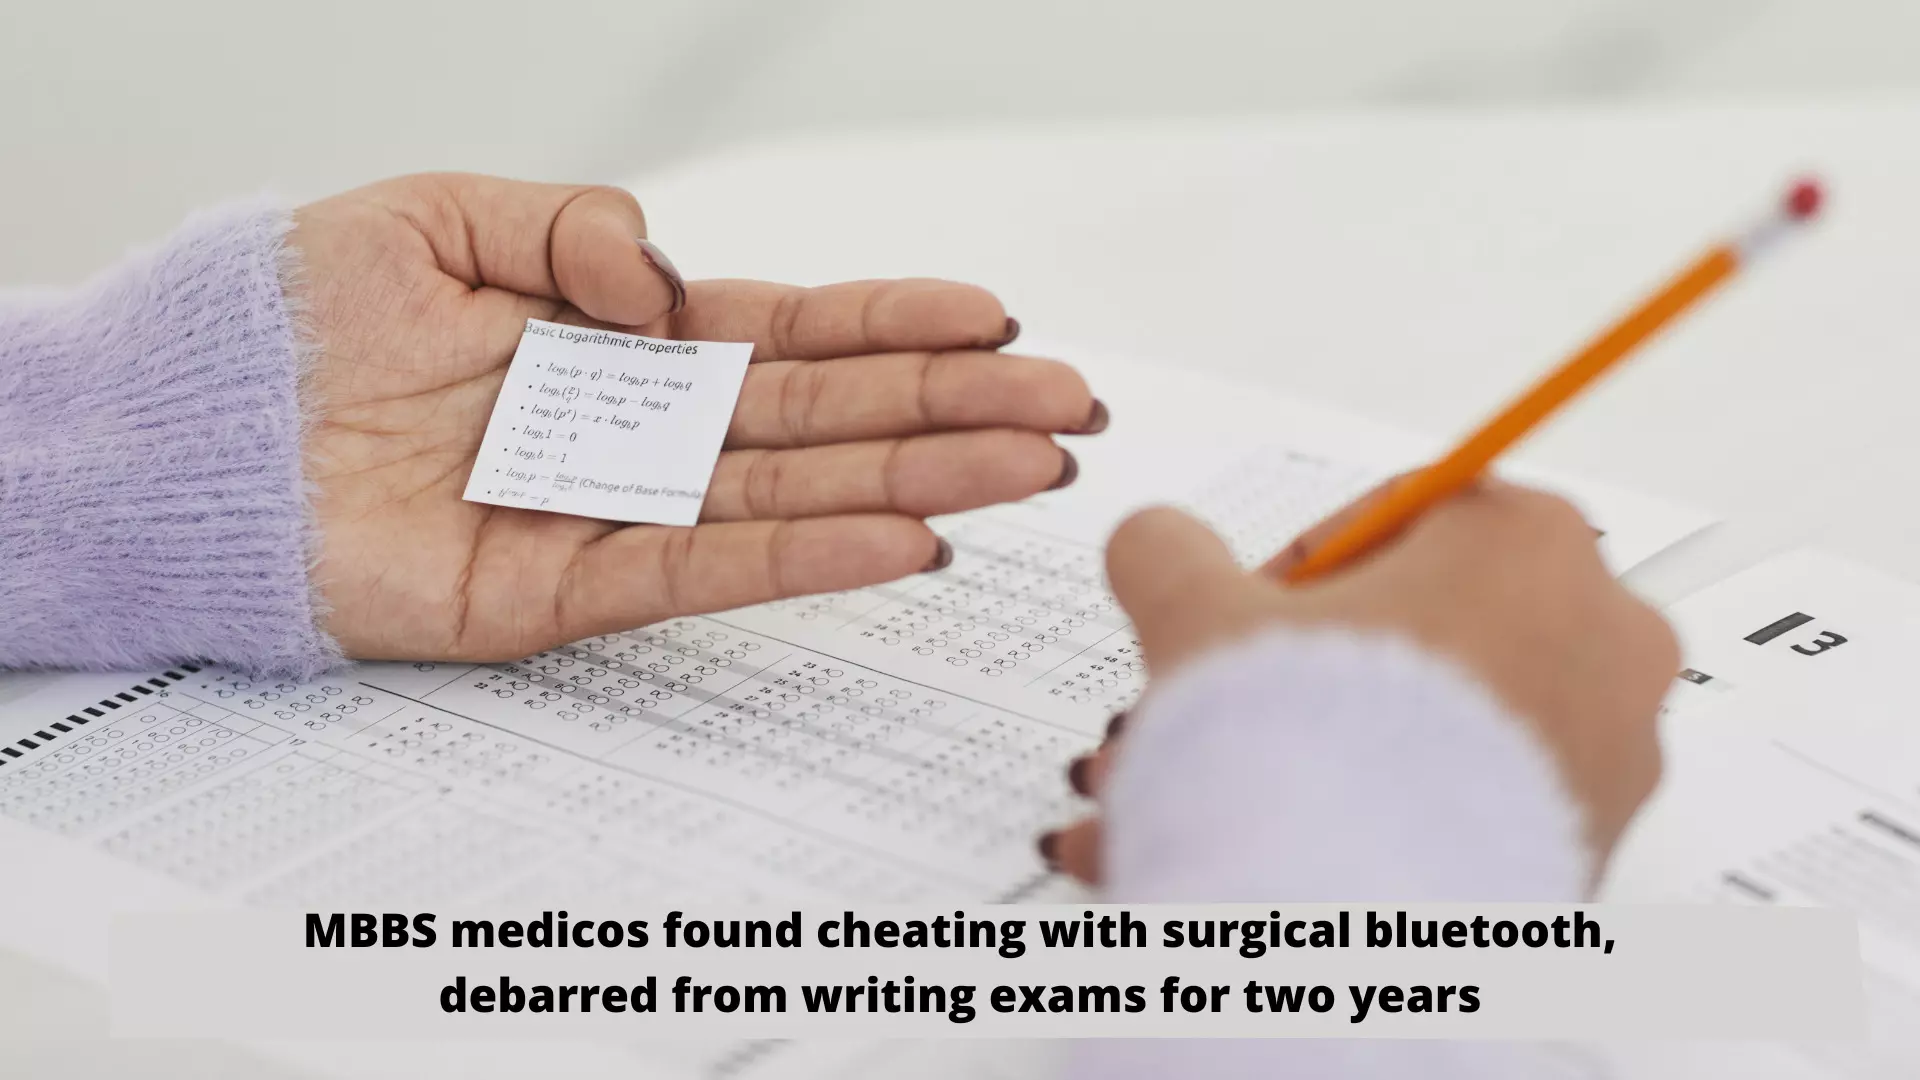 MBBS medicos found cheating with surgical bluetooth, debarred from writing exams for 2 years